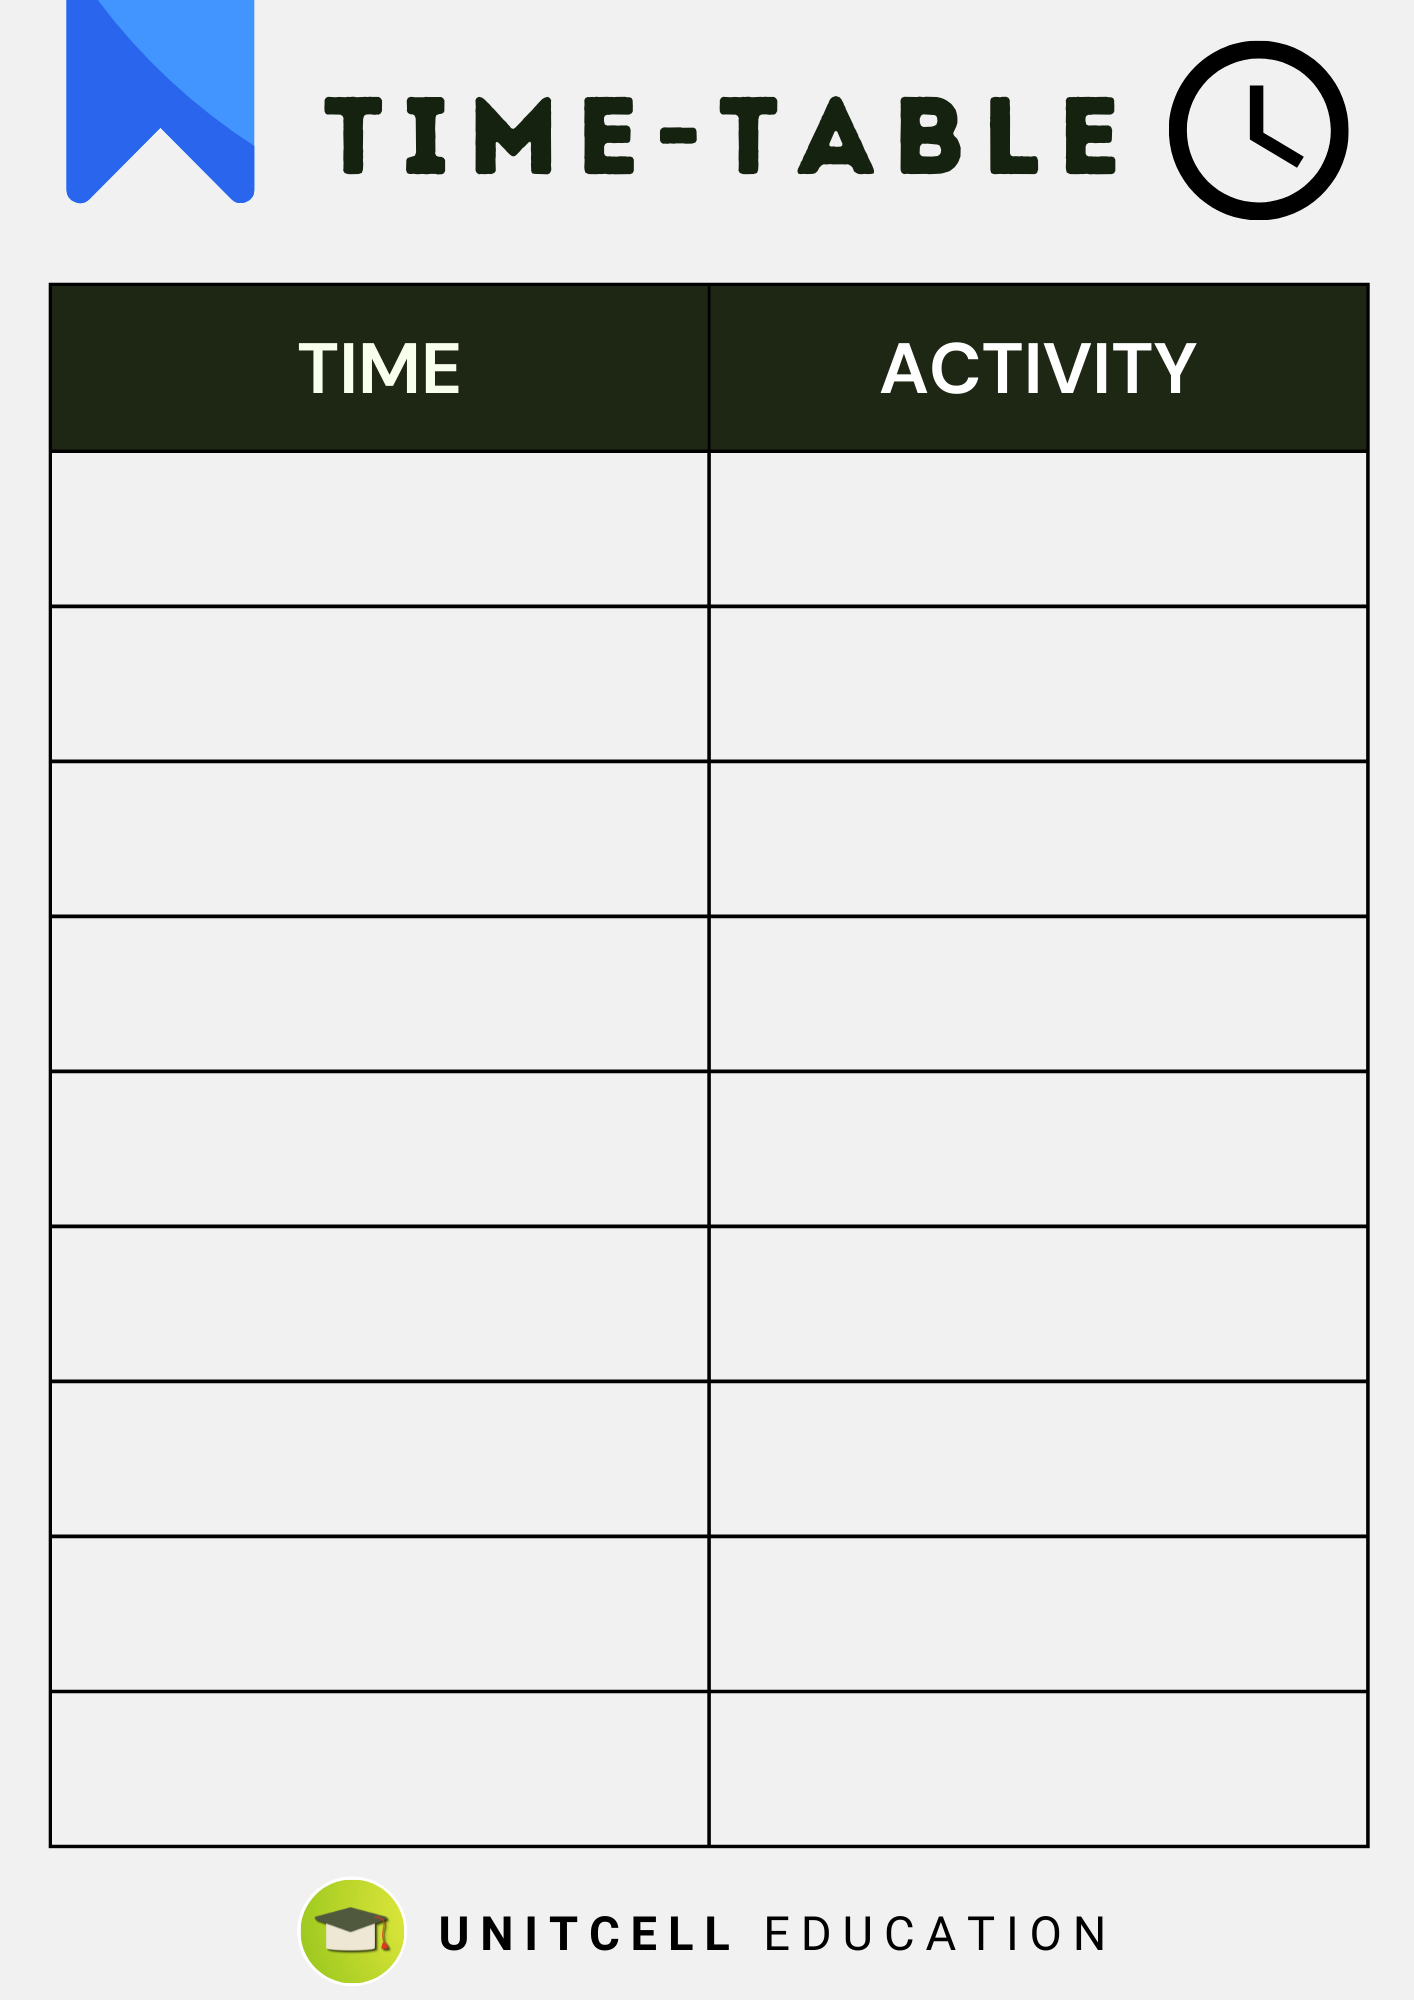 Printable daily routine timetable for students.